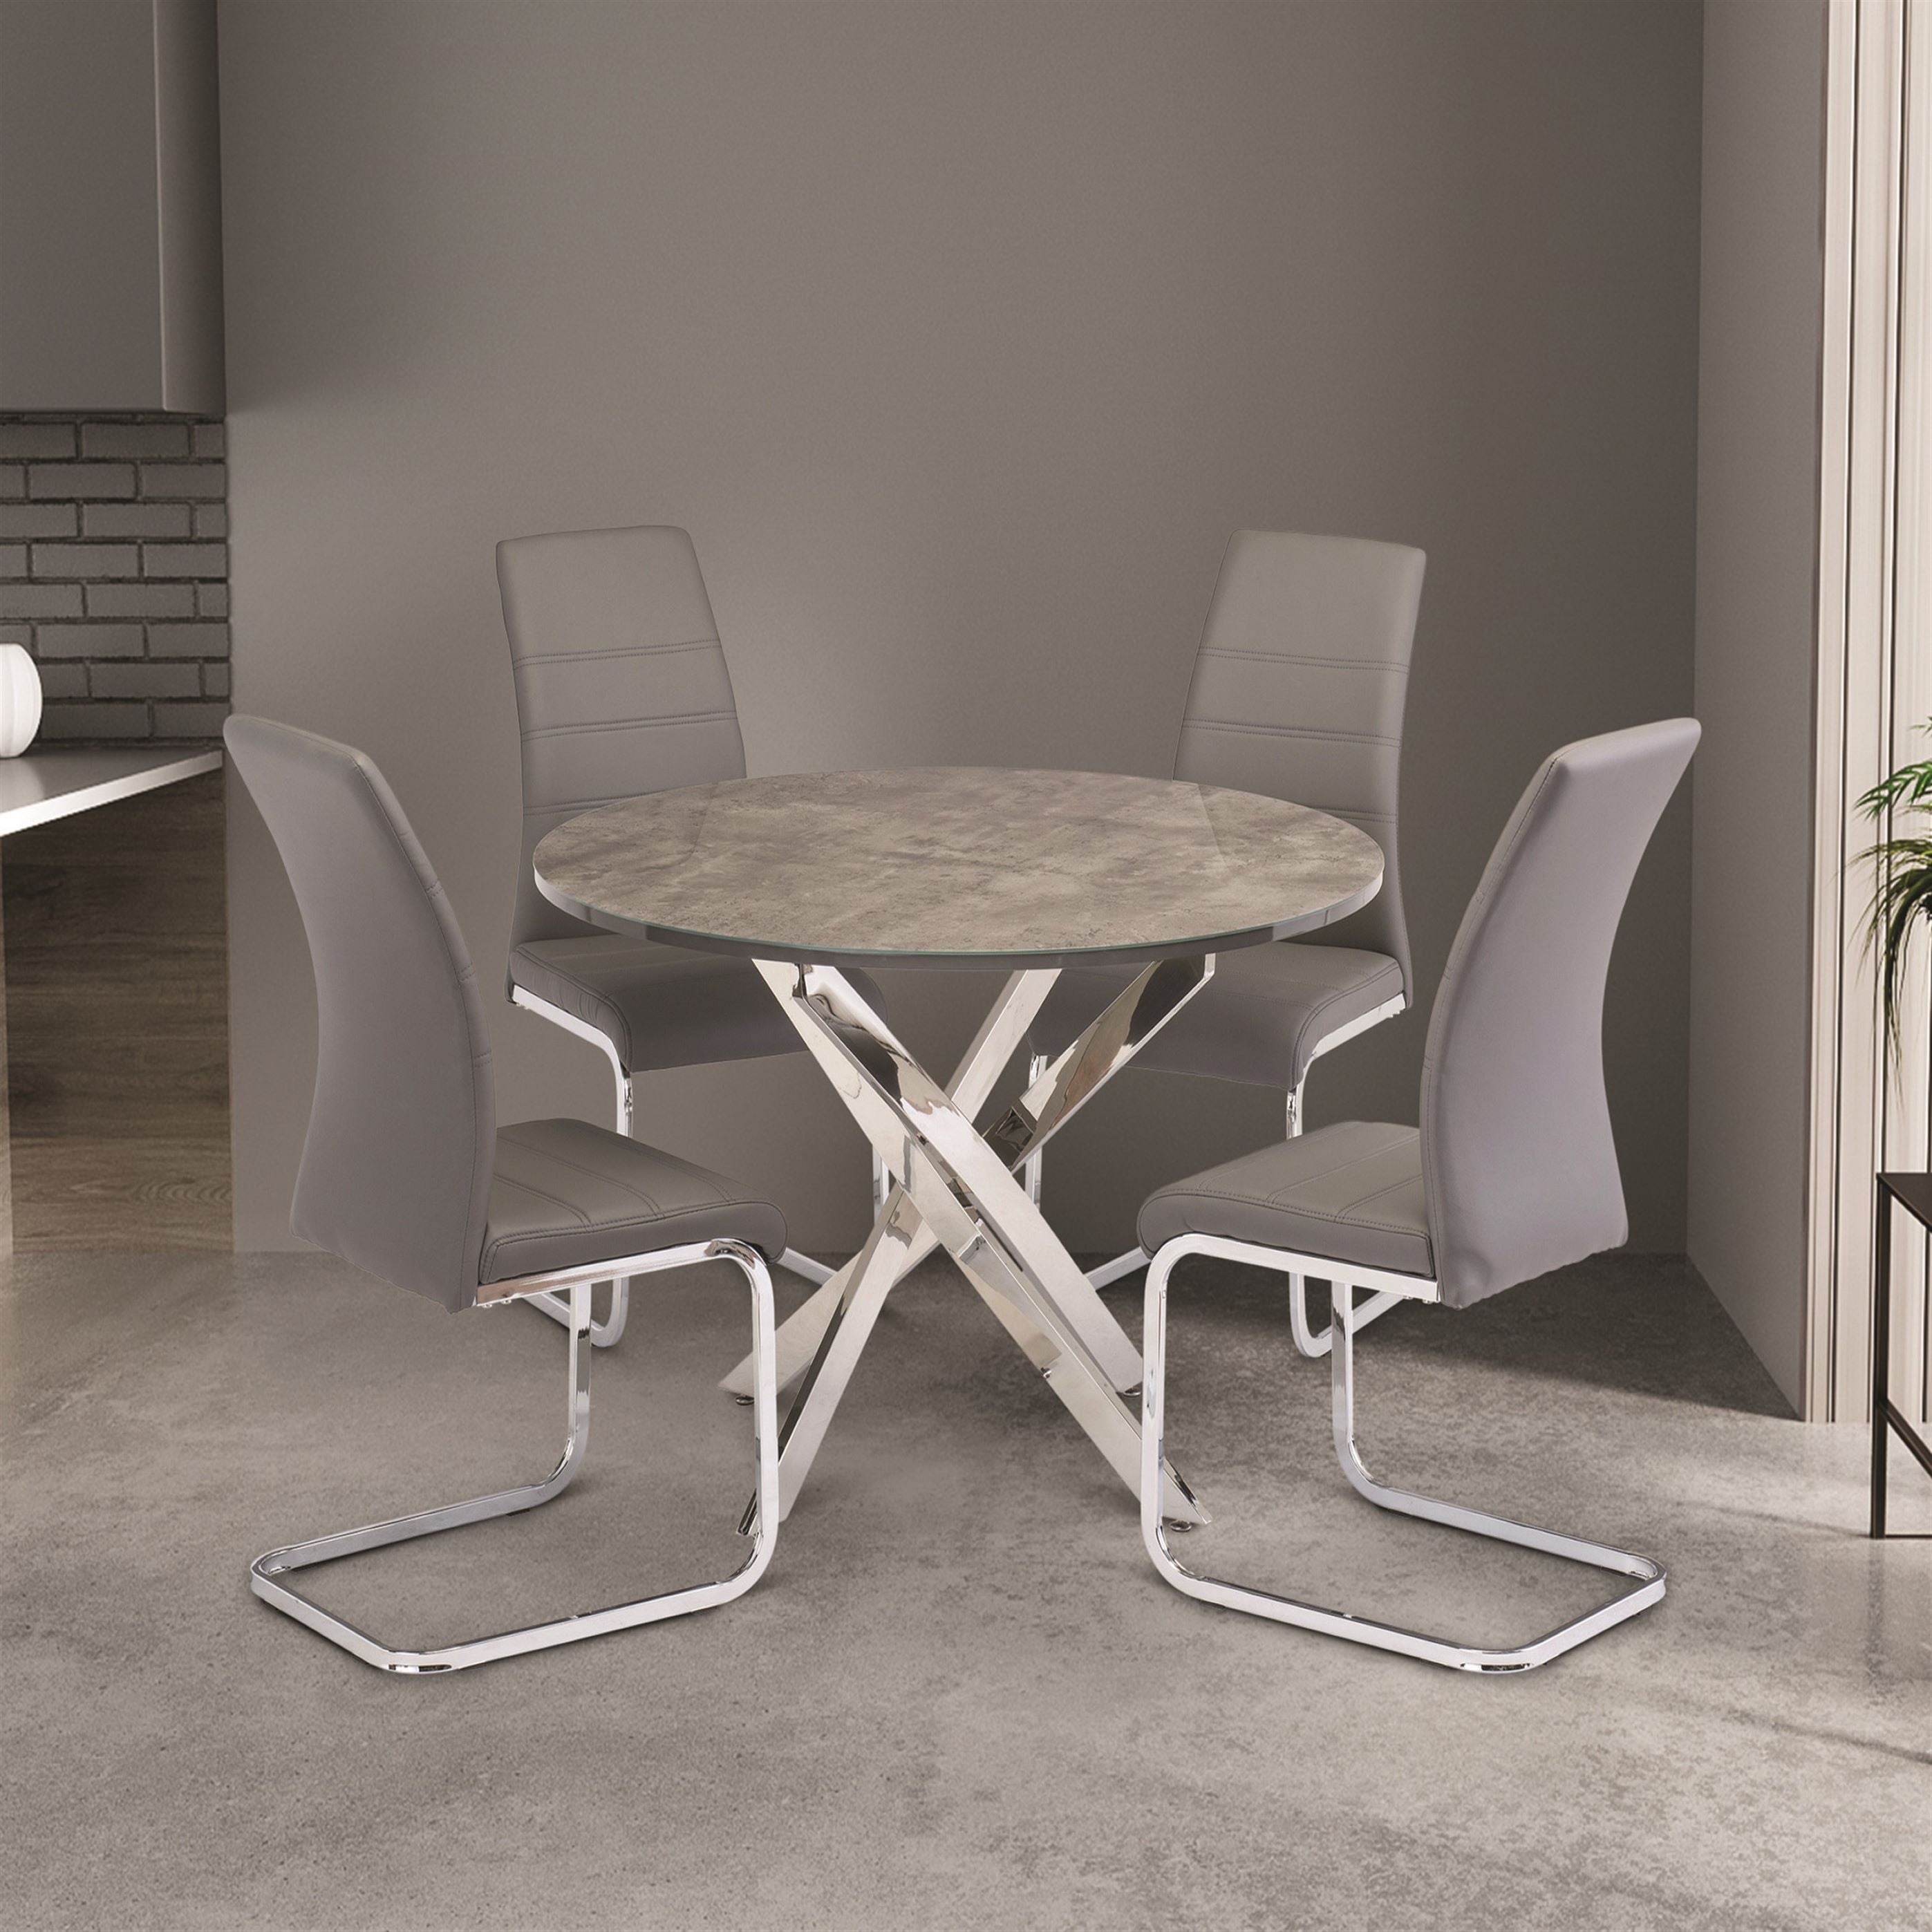 Paris 4 Seater Round Glass Top Dining Table Concrete Grey